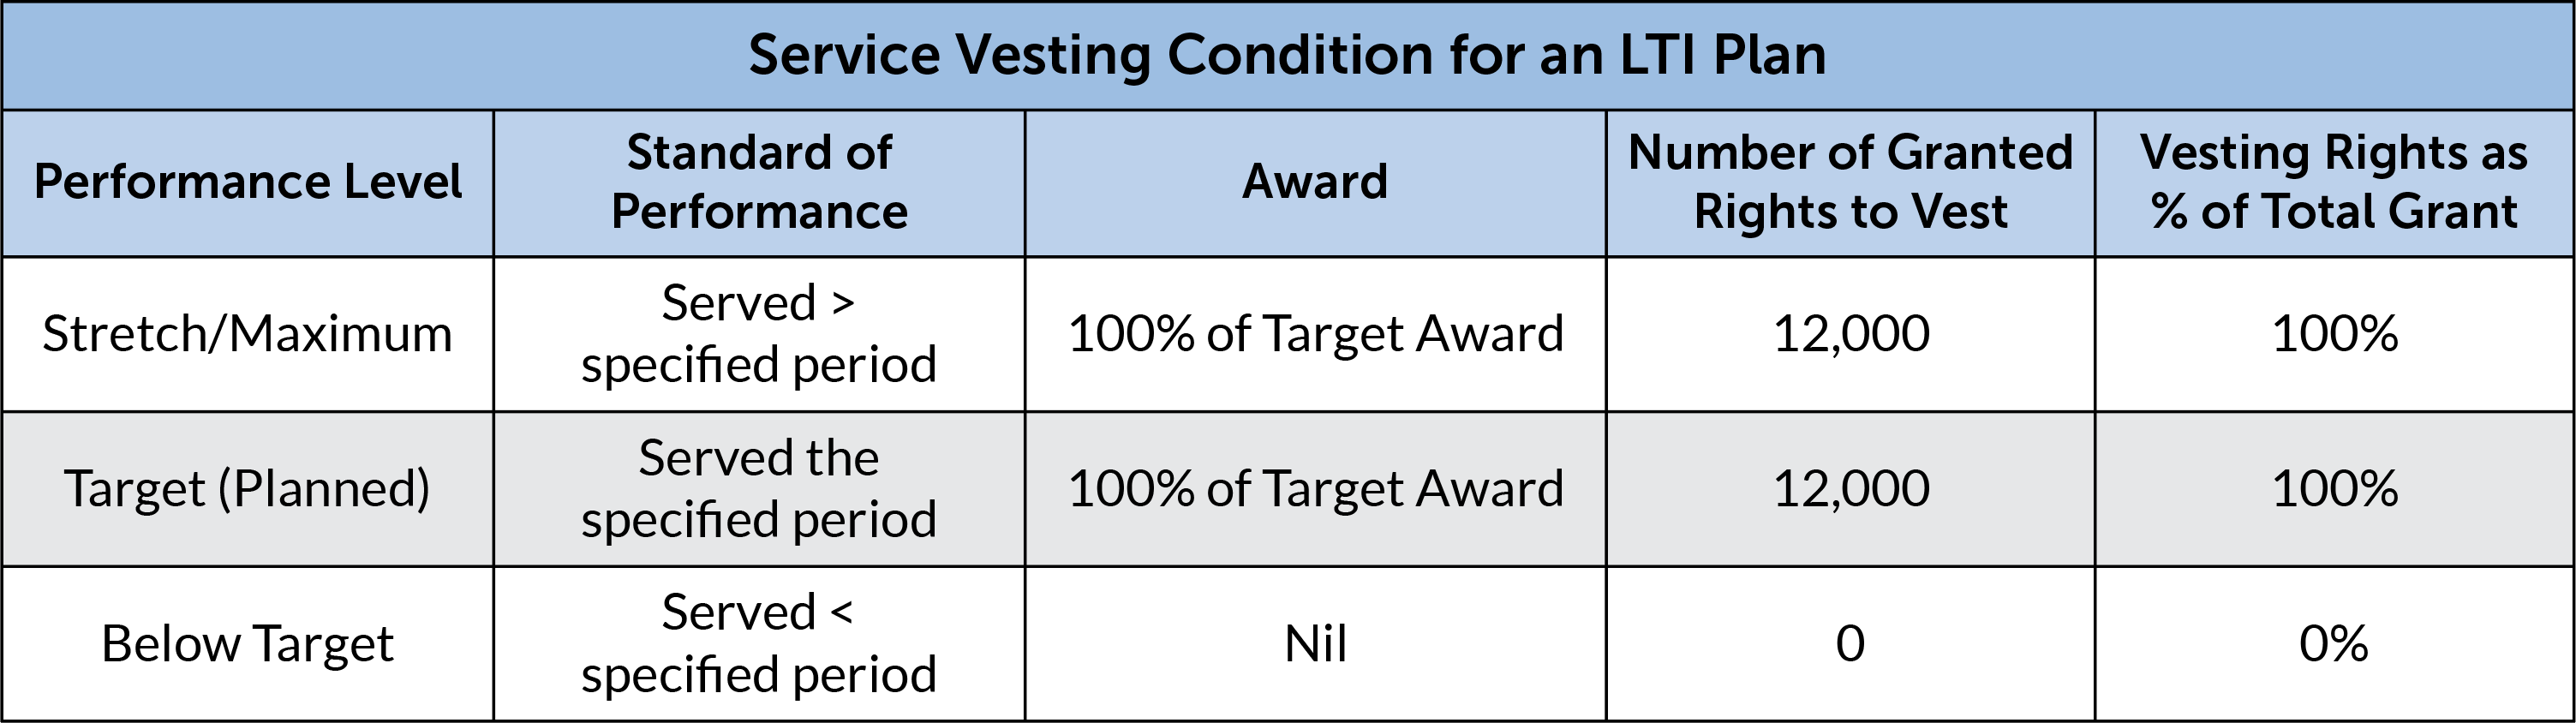 Table: Service as a Vesting Condition for an LTI Plan